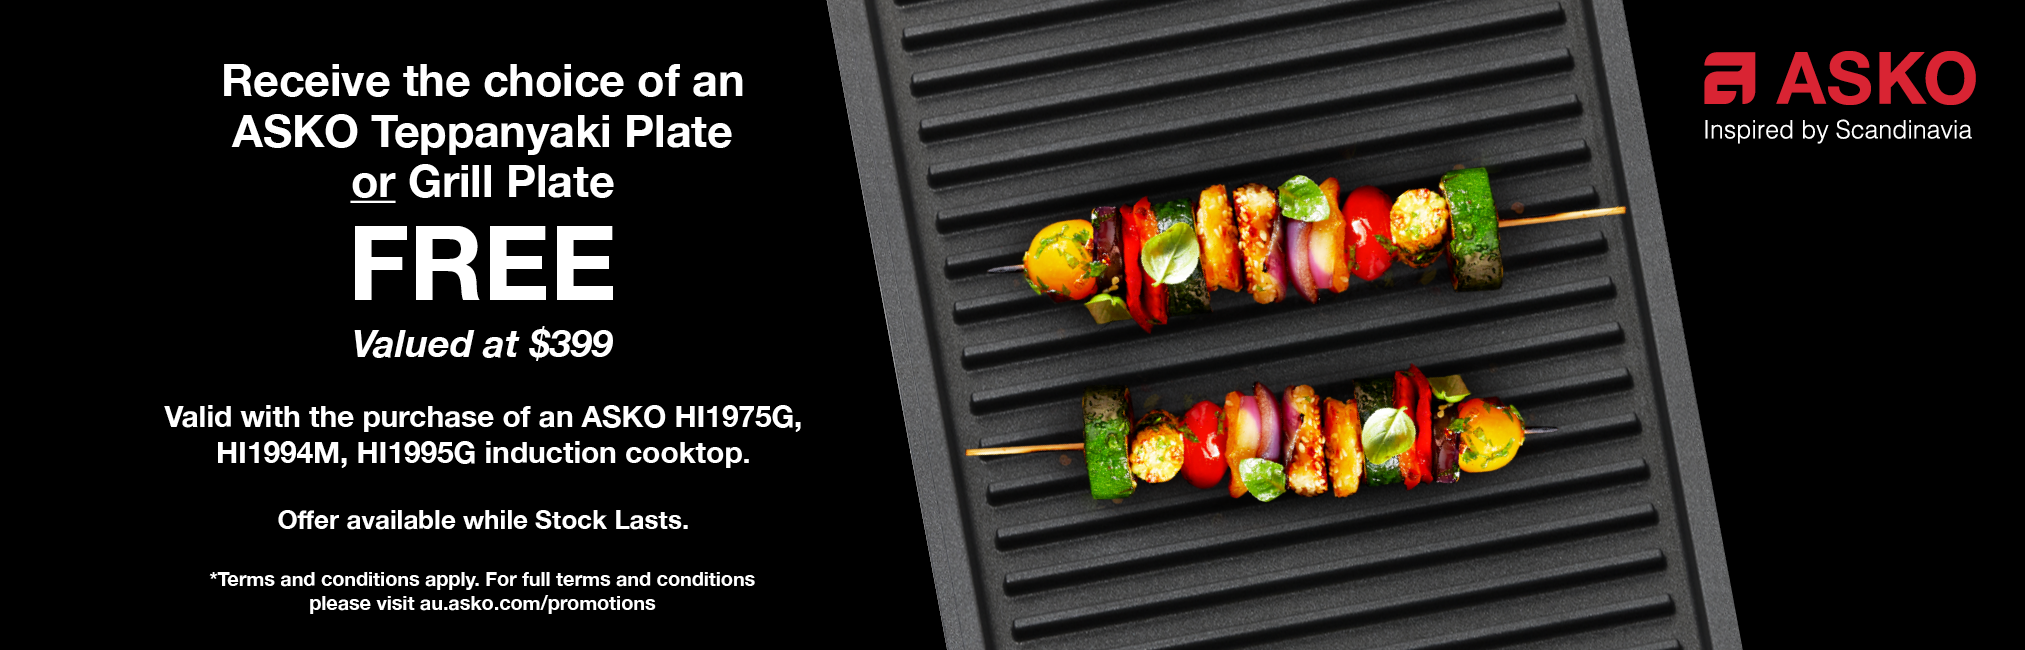 Purchase Select ASKO Induction Cooktop & Receive Bonus Grill Plate OR Teppanyaki Plate Valued at $399*